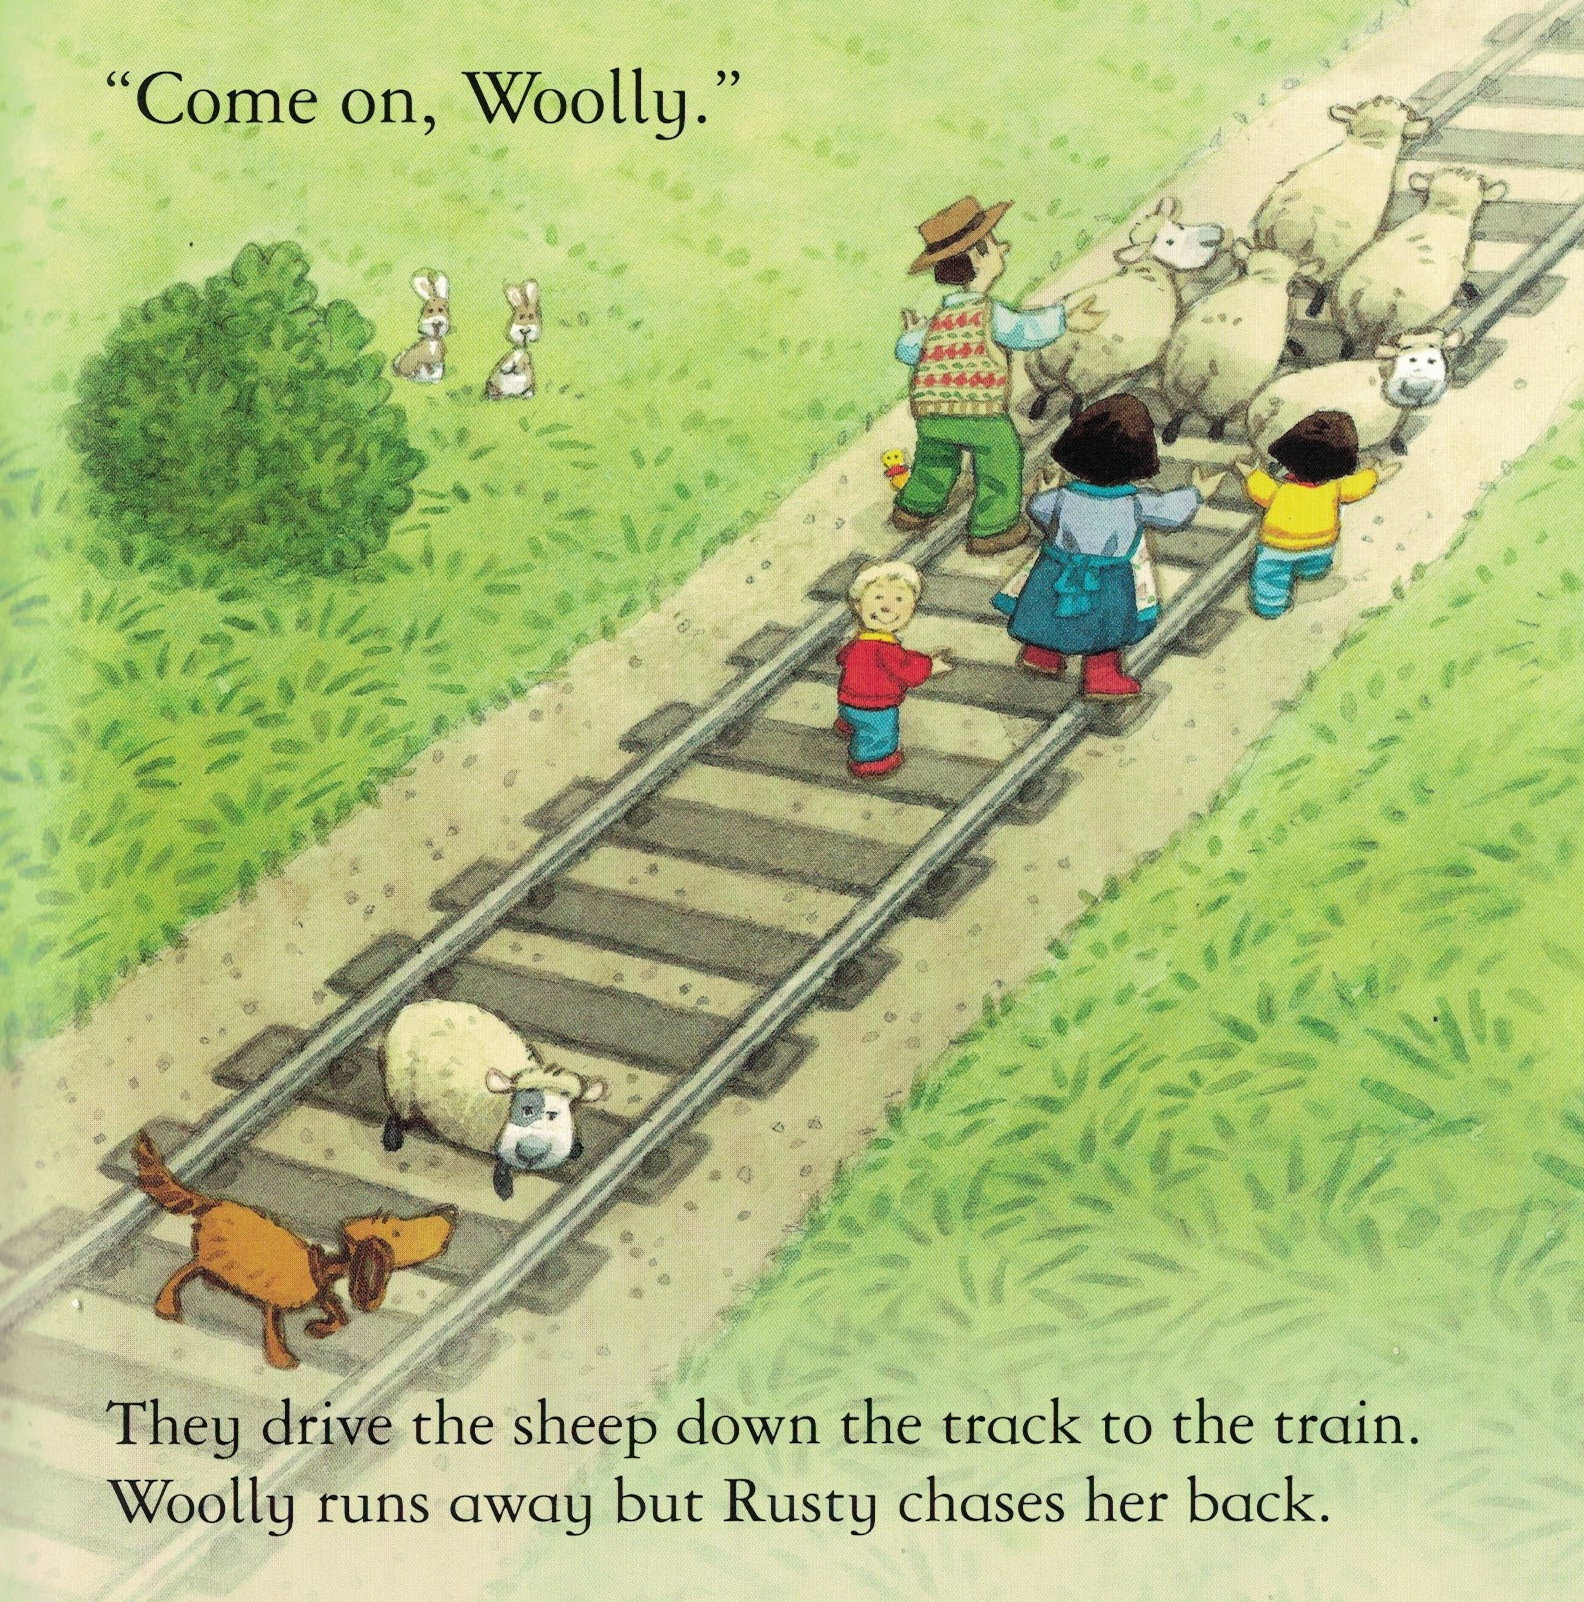 woolly stops the train come on woolly